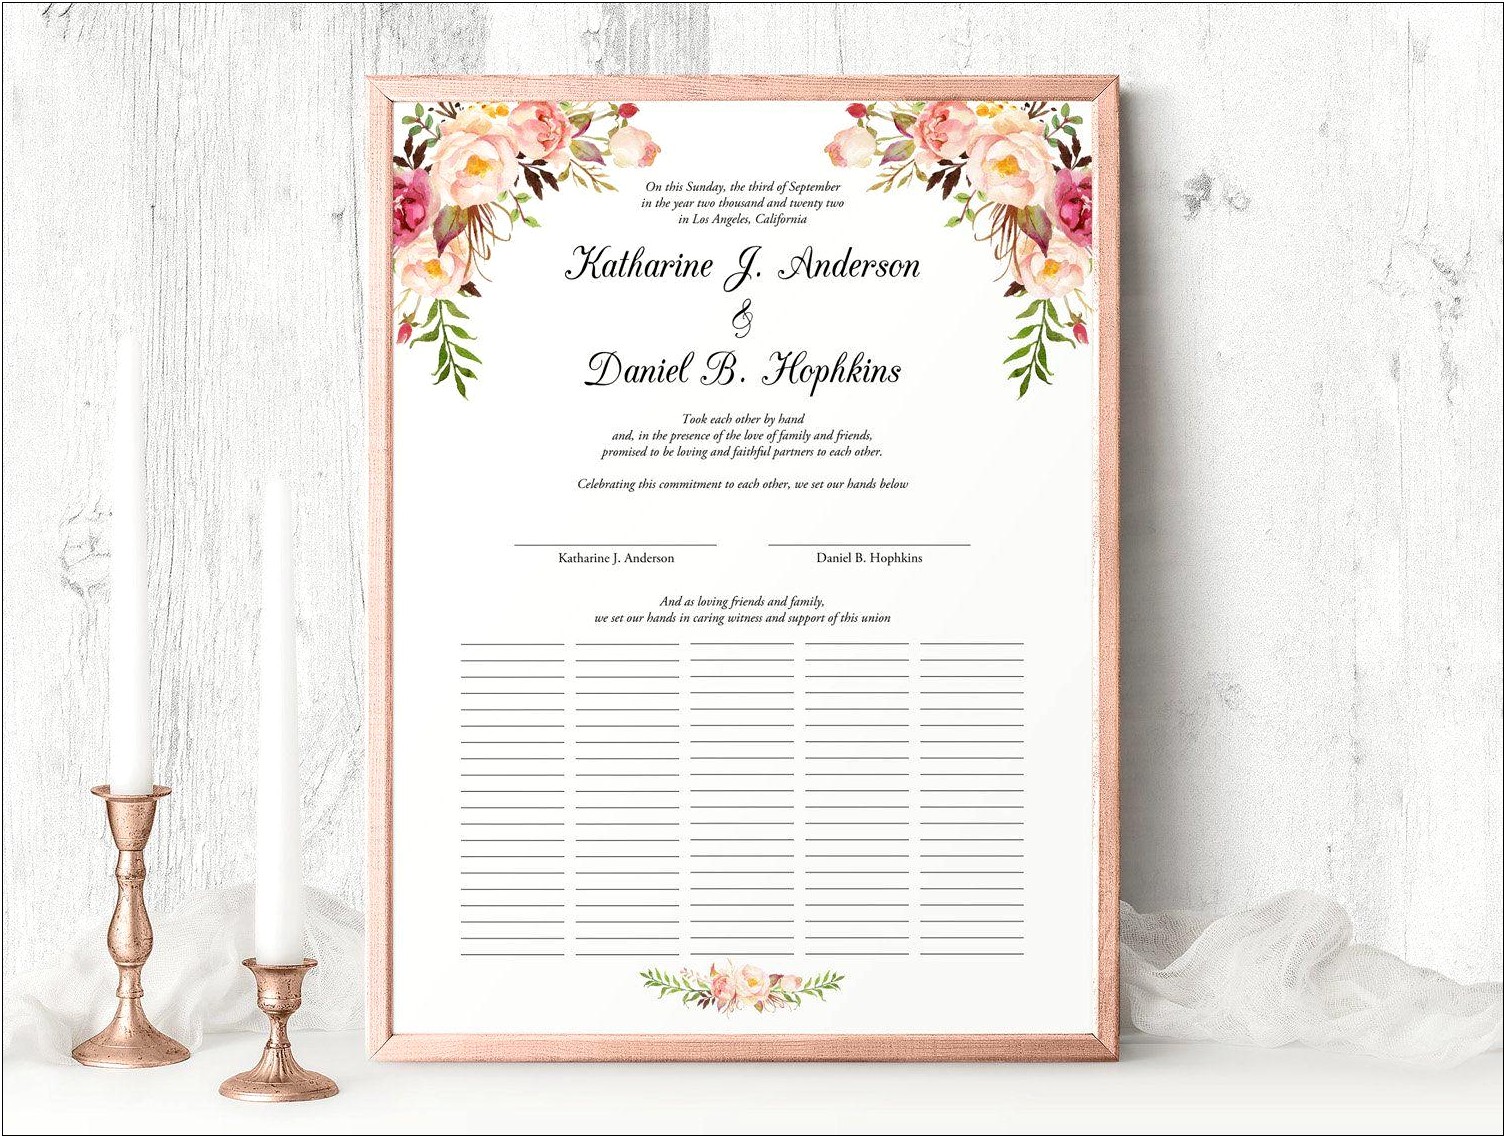 Quaker Marriage Certificate Free Template Download